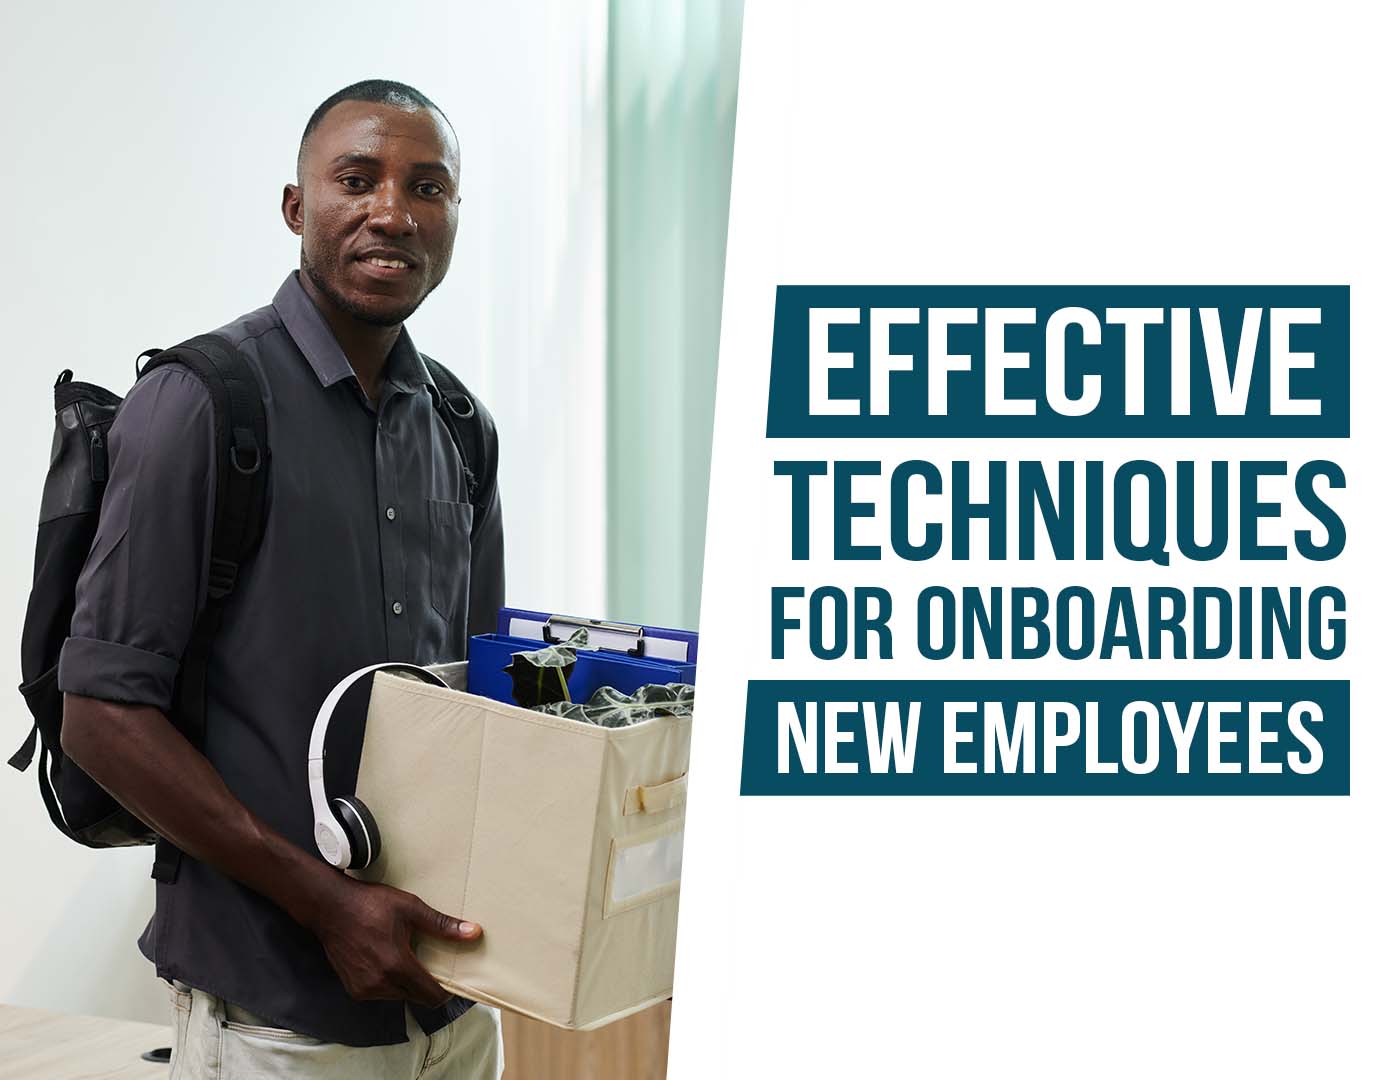 Effective techniques for onboarding new employees